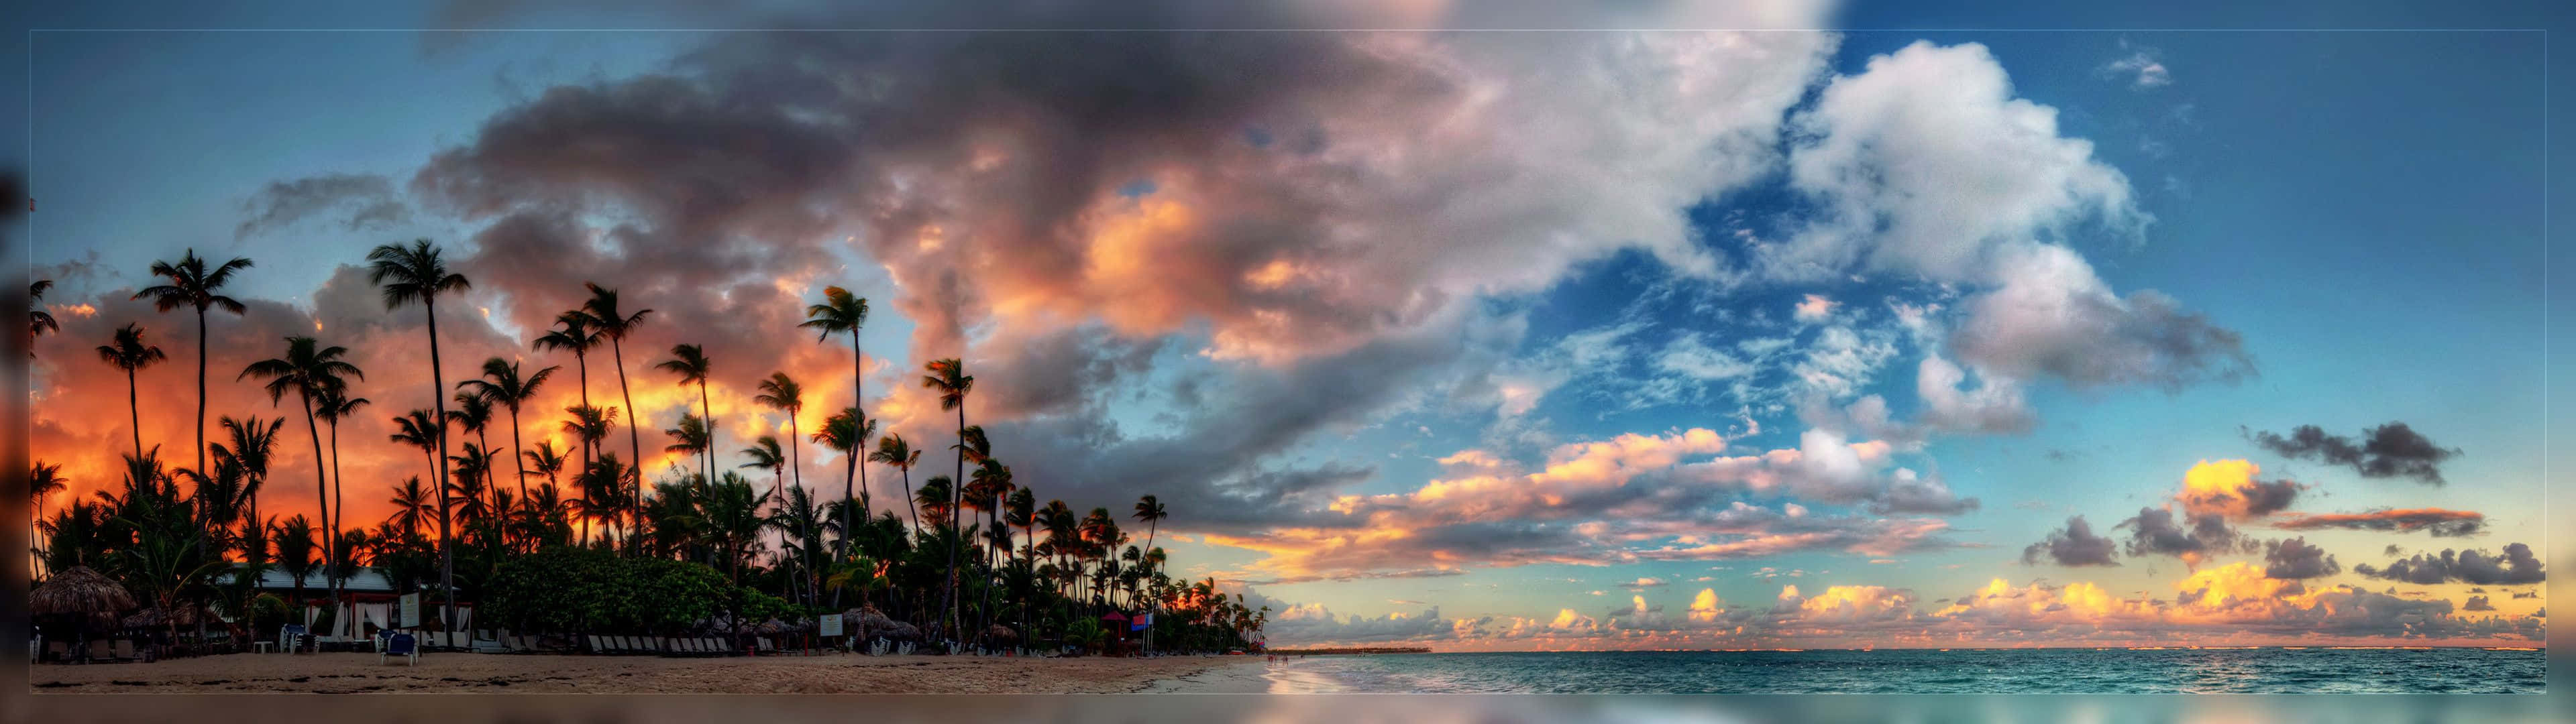 A Sunset With Palm Trees And Clouds On The Beach